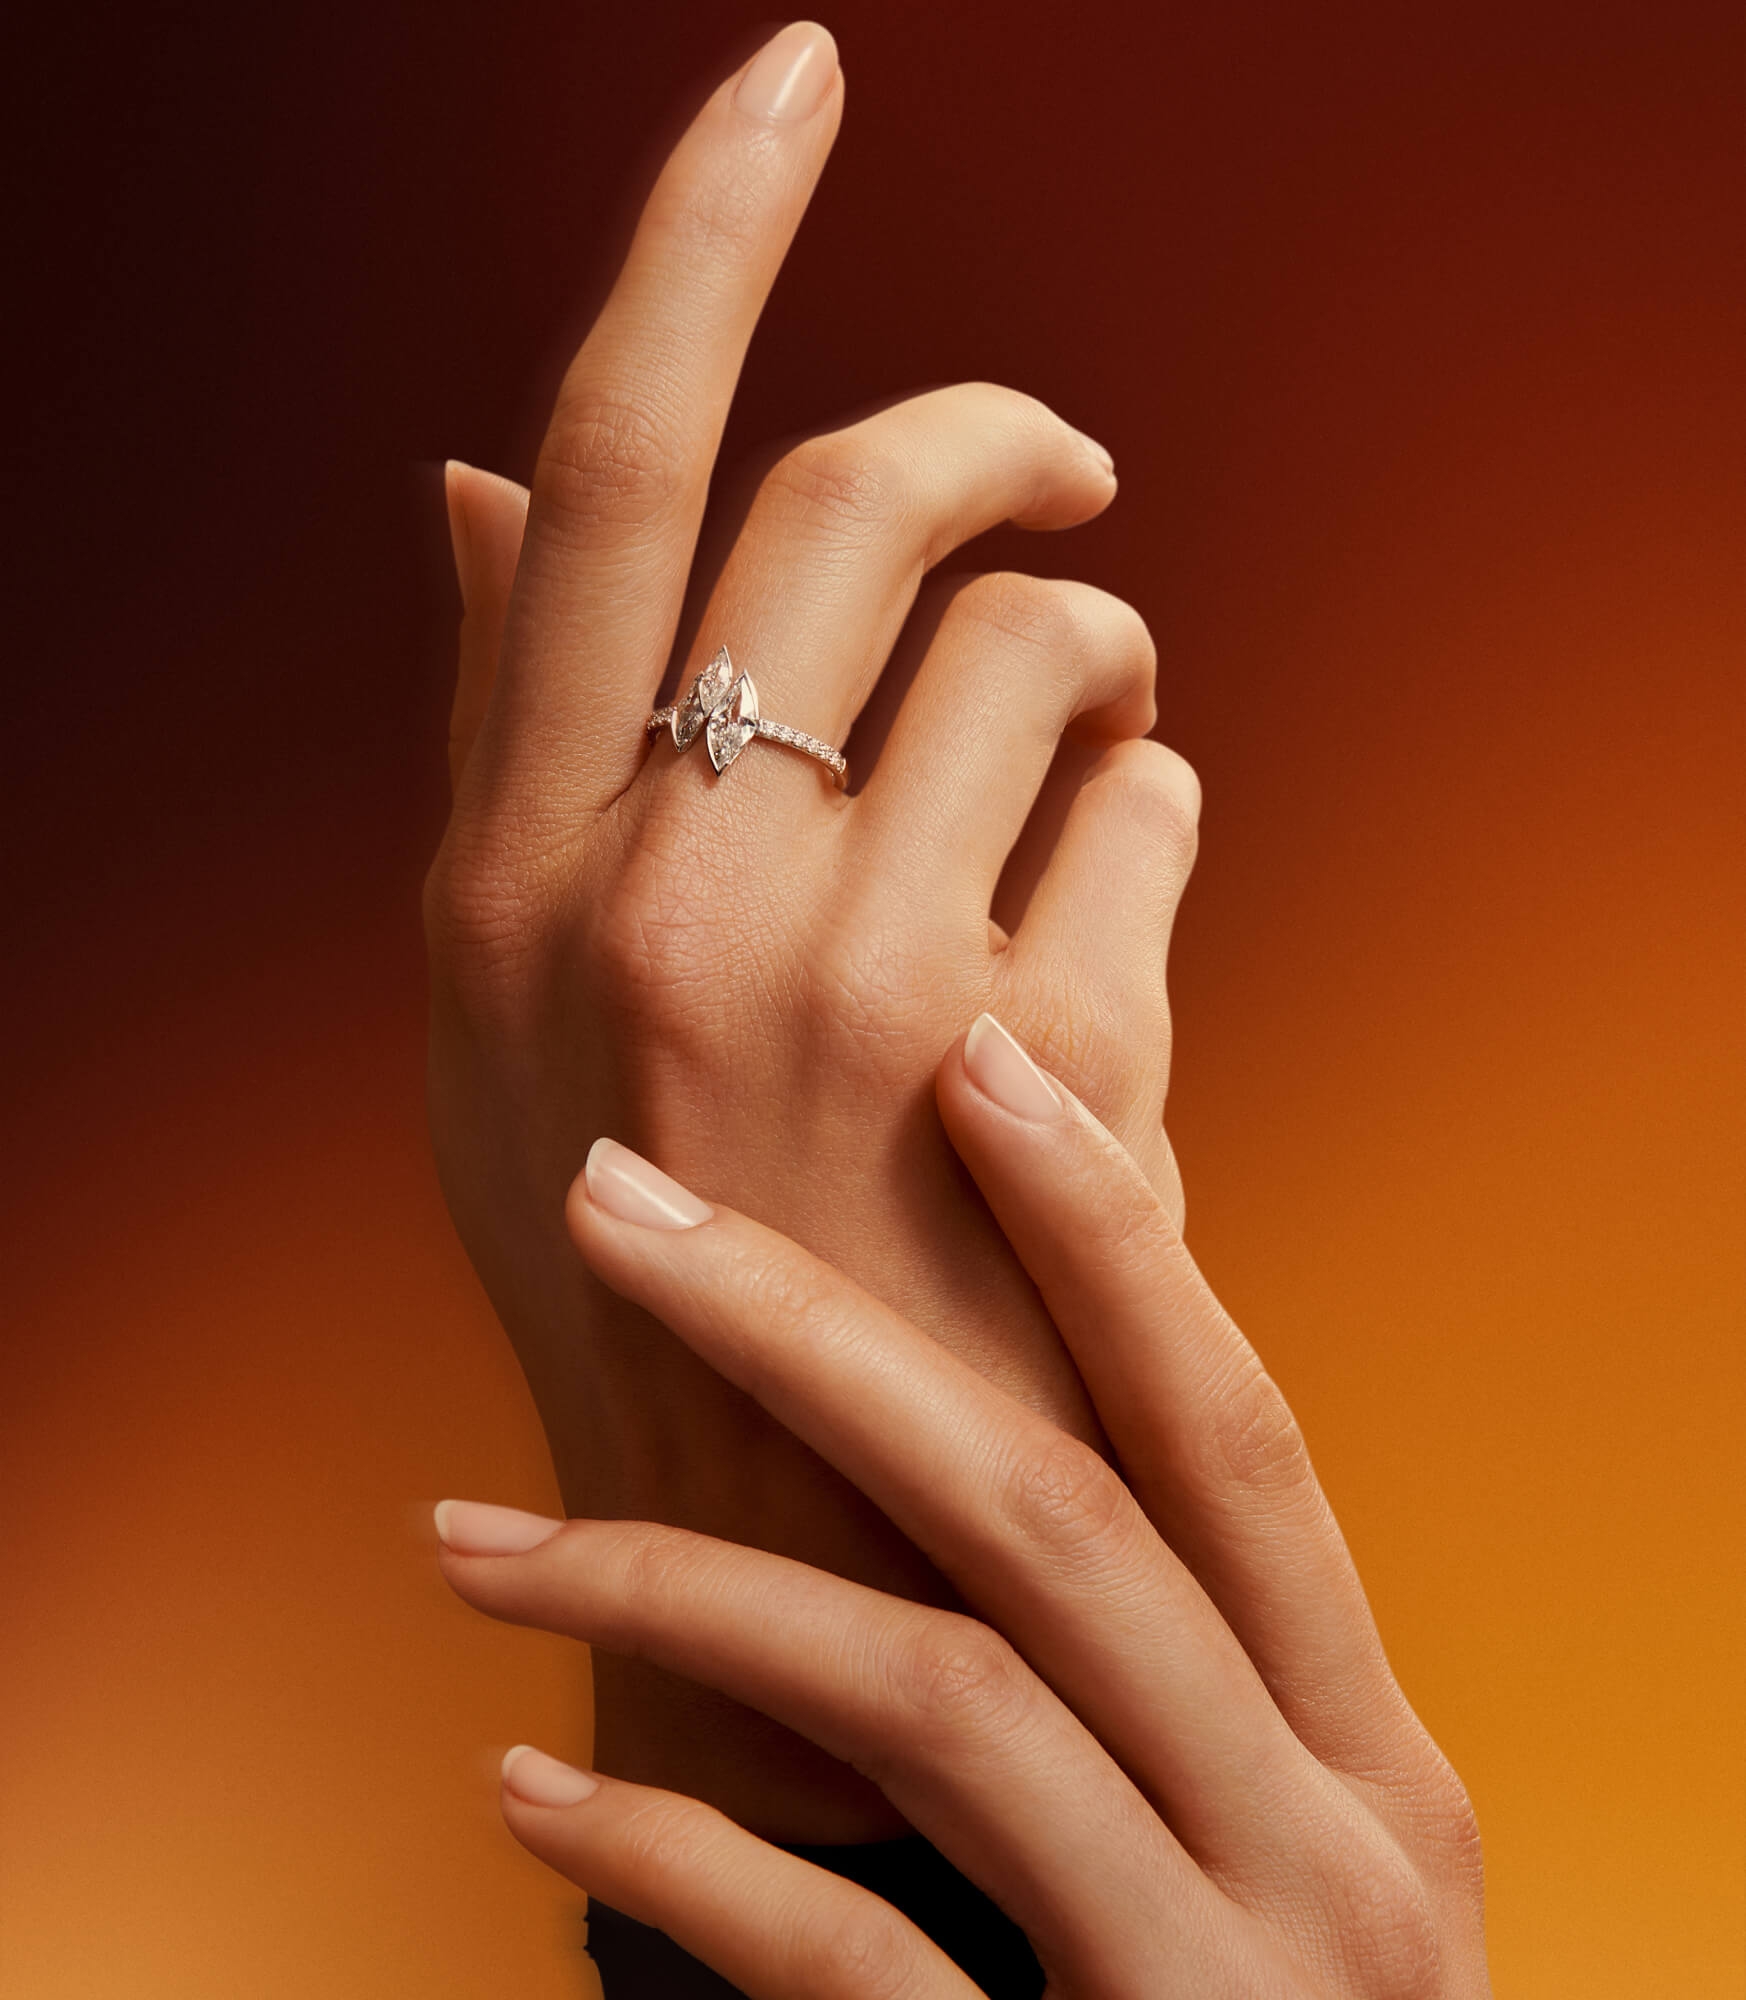 Unsaid's Signature cut Flame lab-grown diamond ring crafted in 18k recycled gold. 